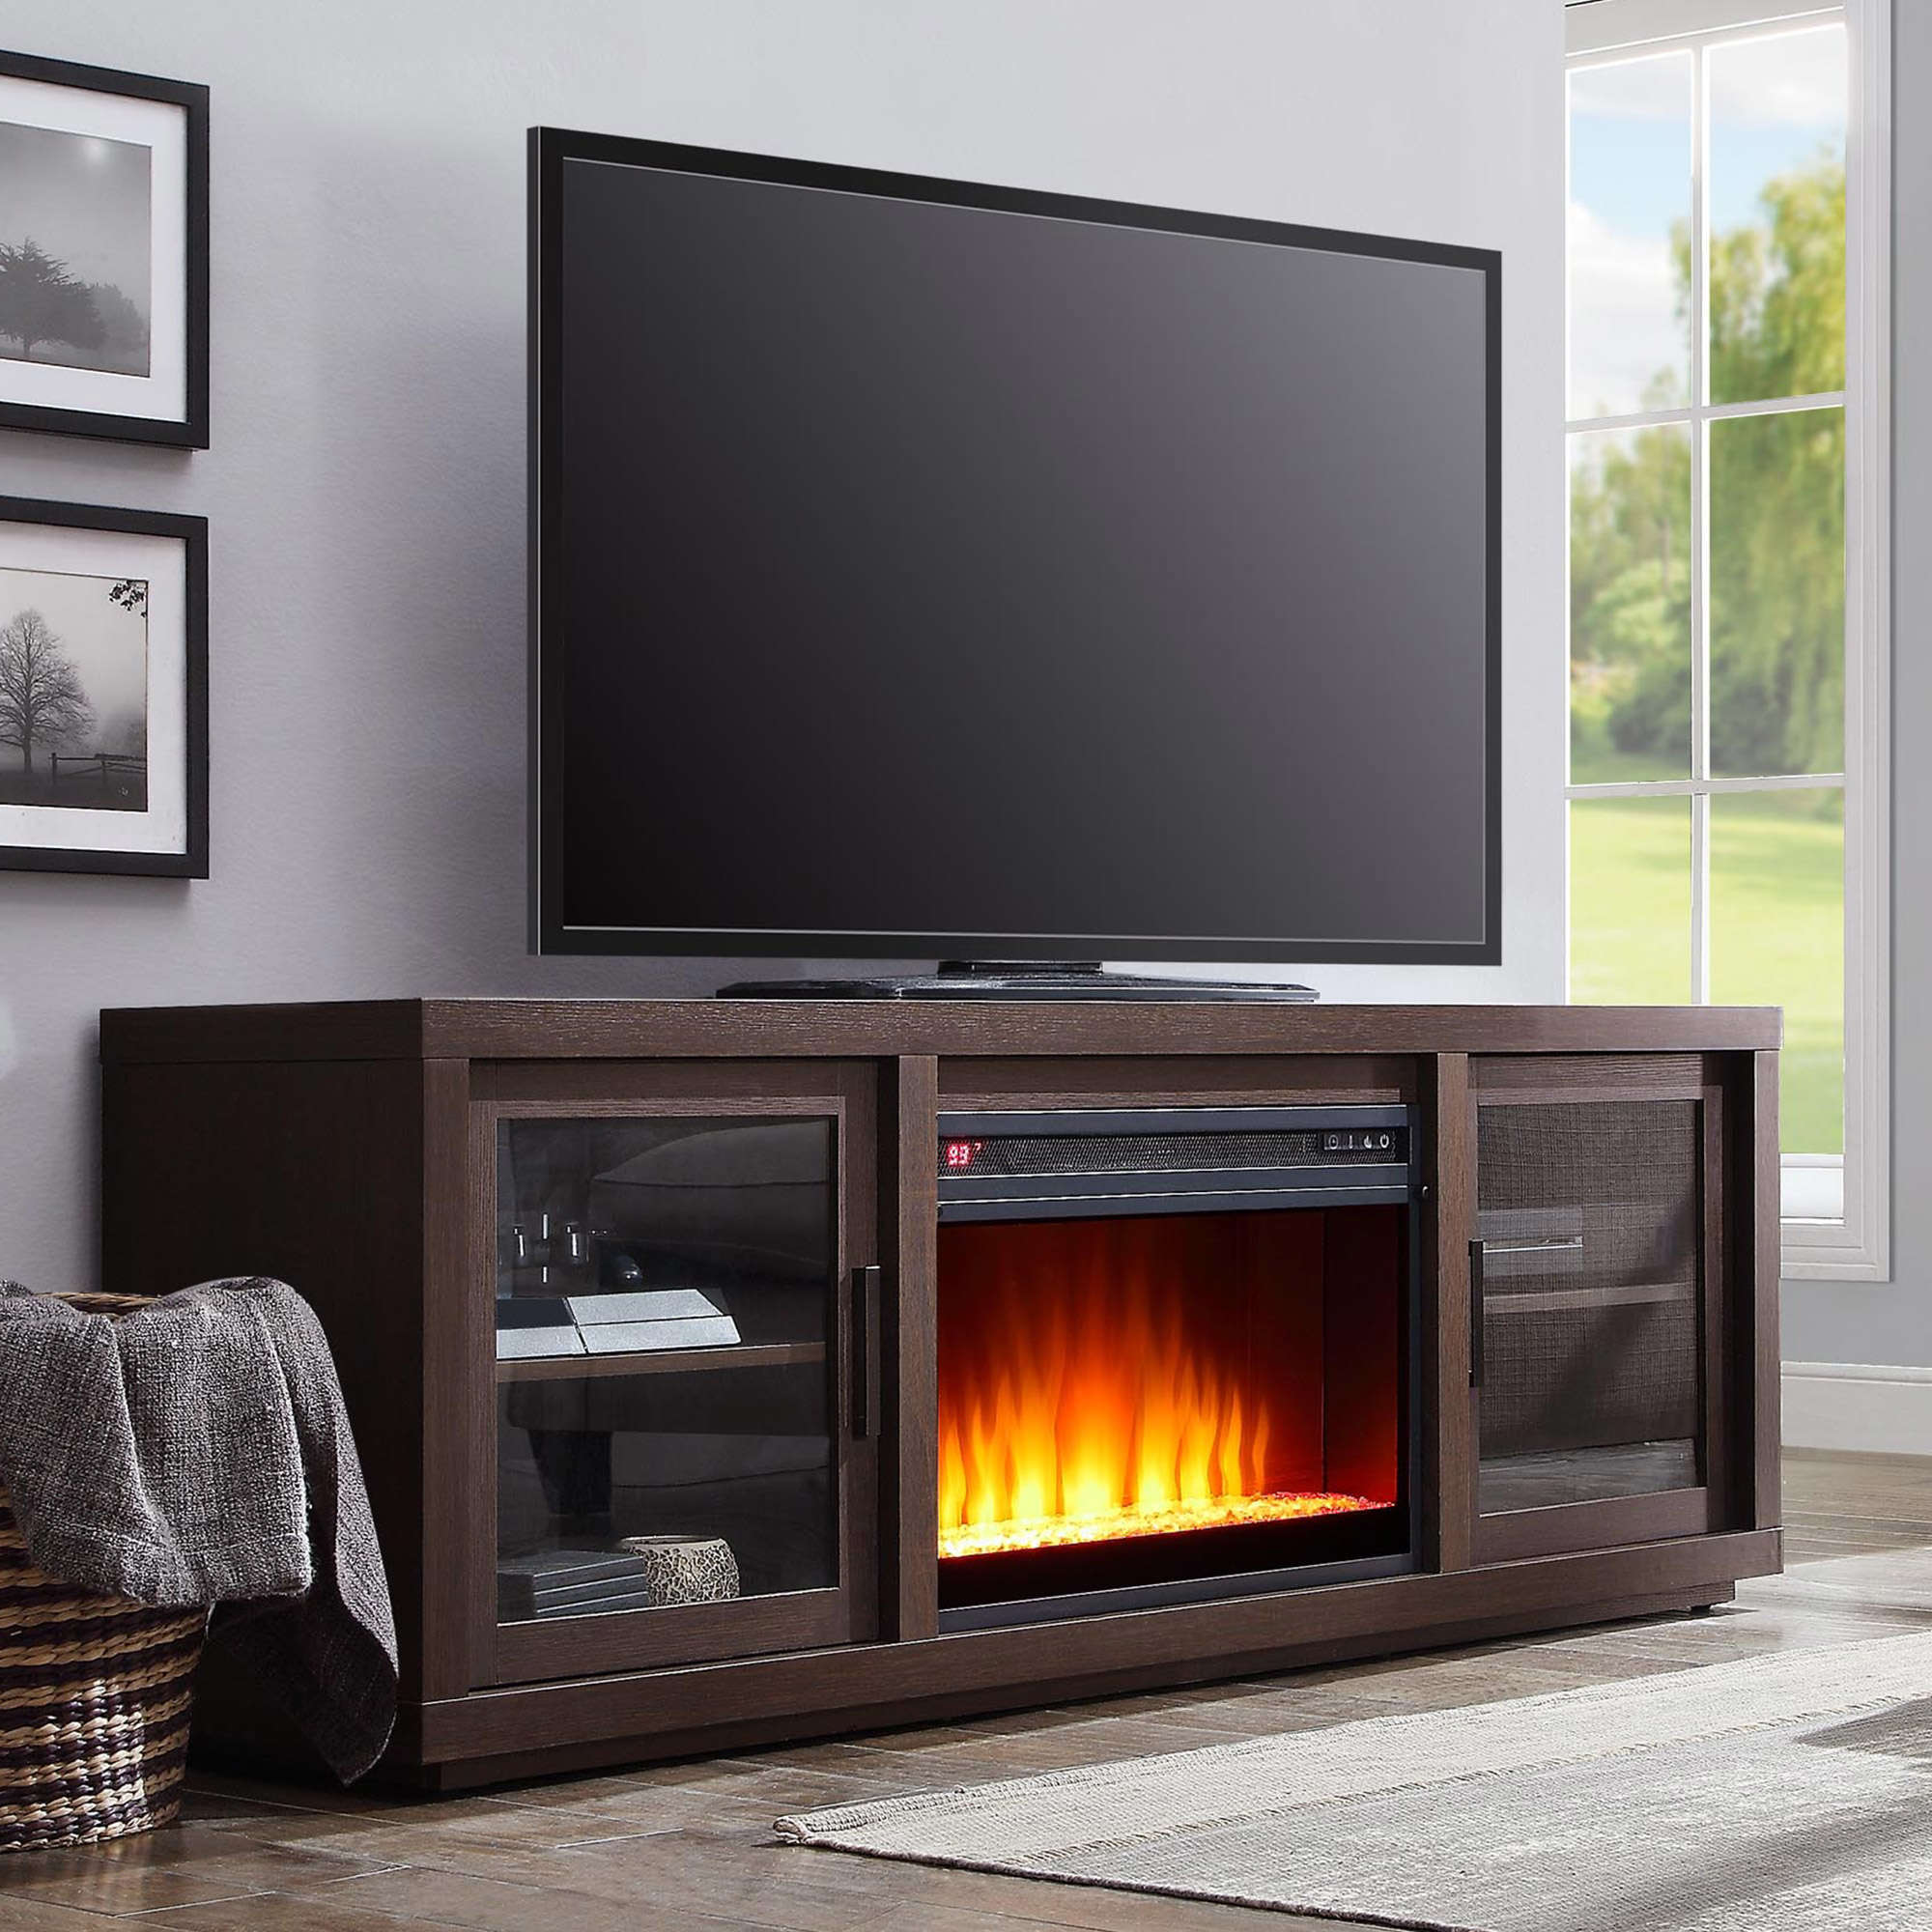 Better Homes & Gardens Steele Media Fireplace Console Television Stand for TVs up to 80" Espresso Finish - image 1 of 9